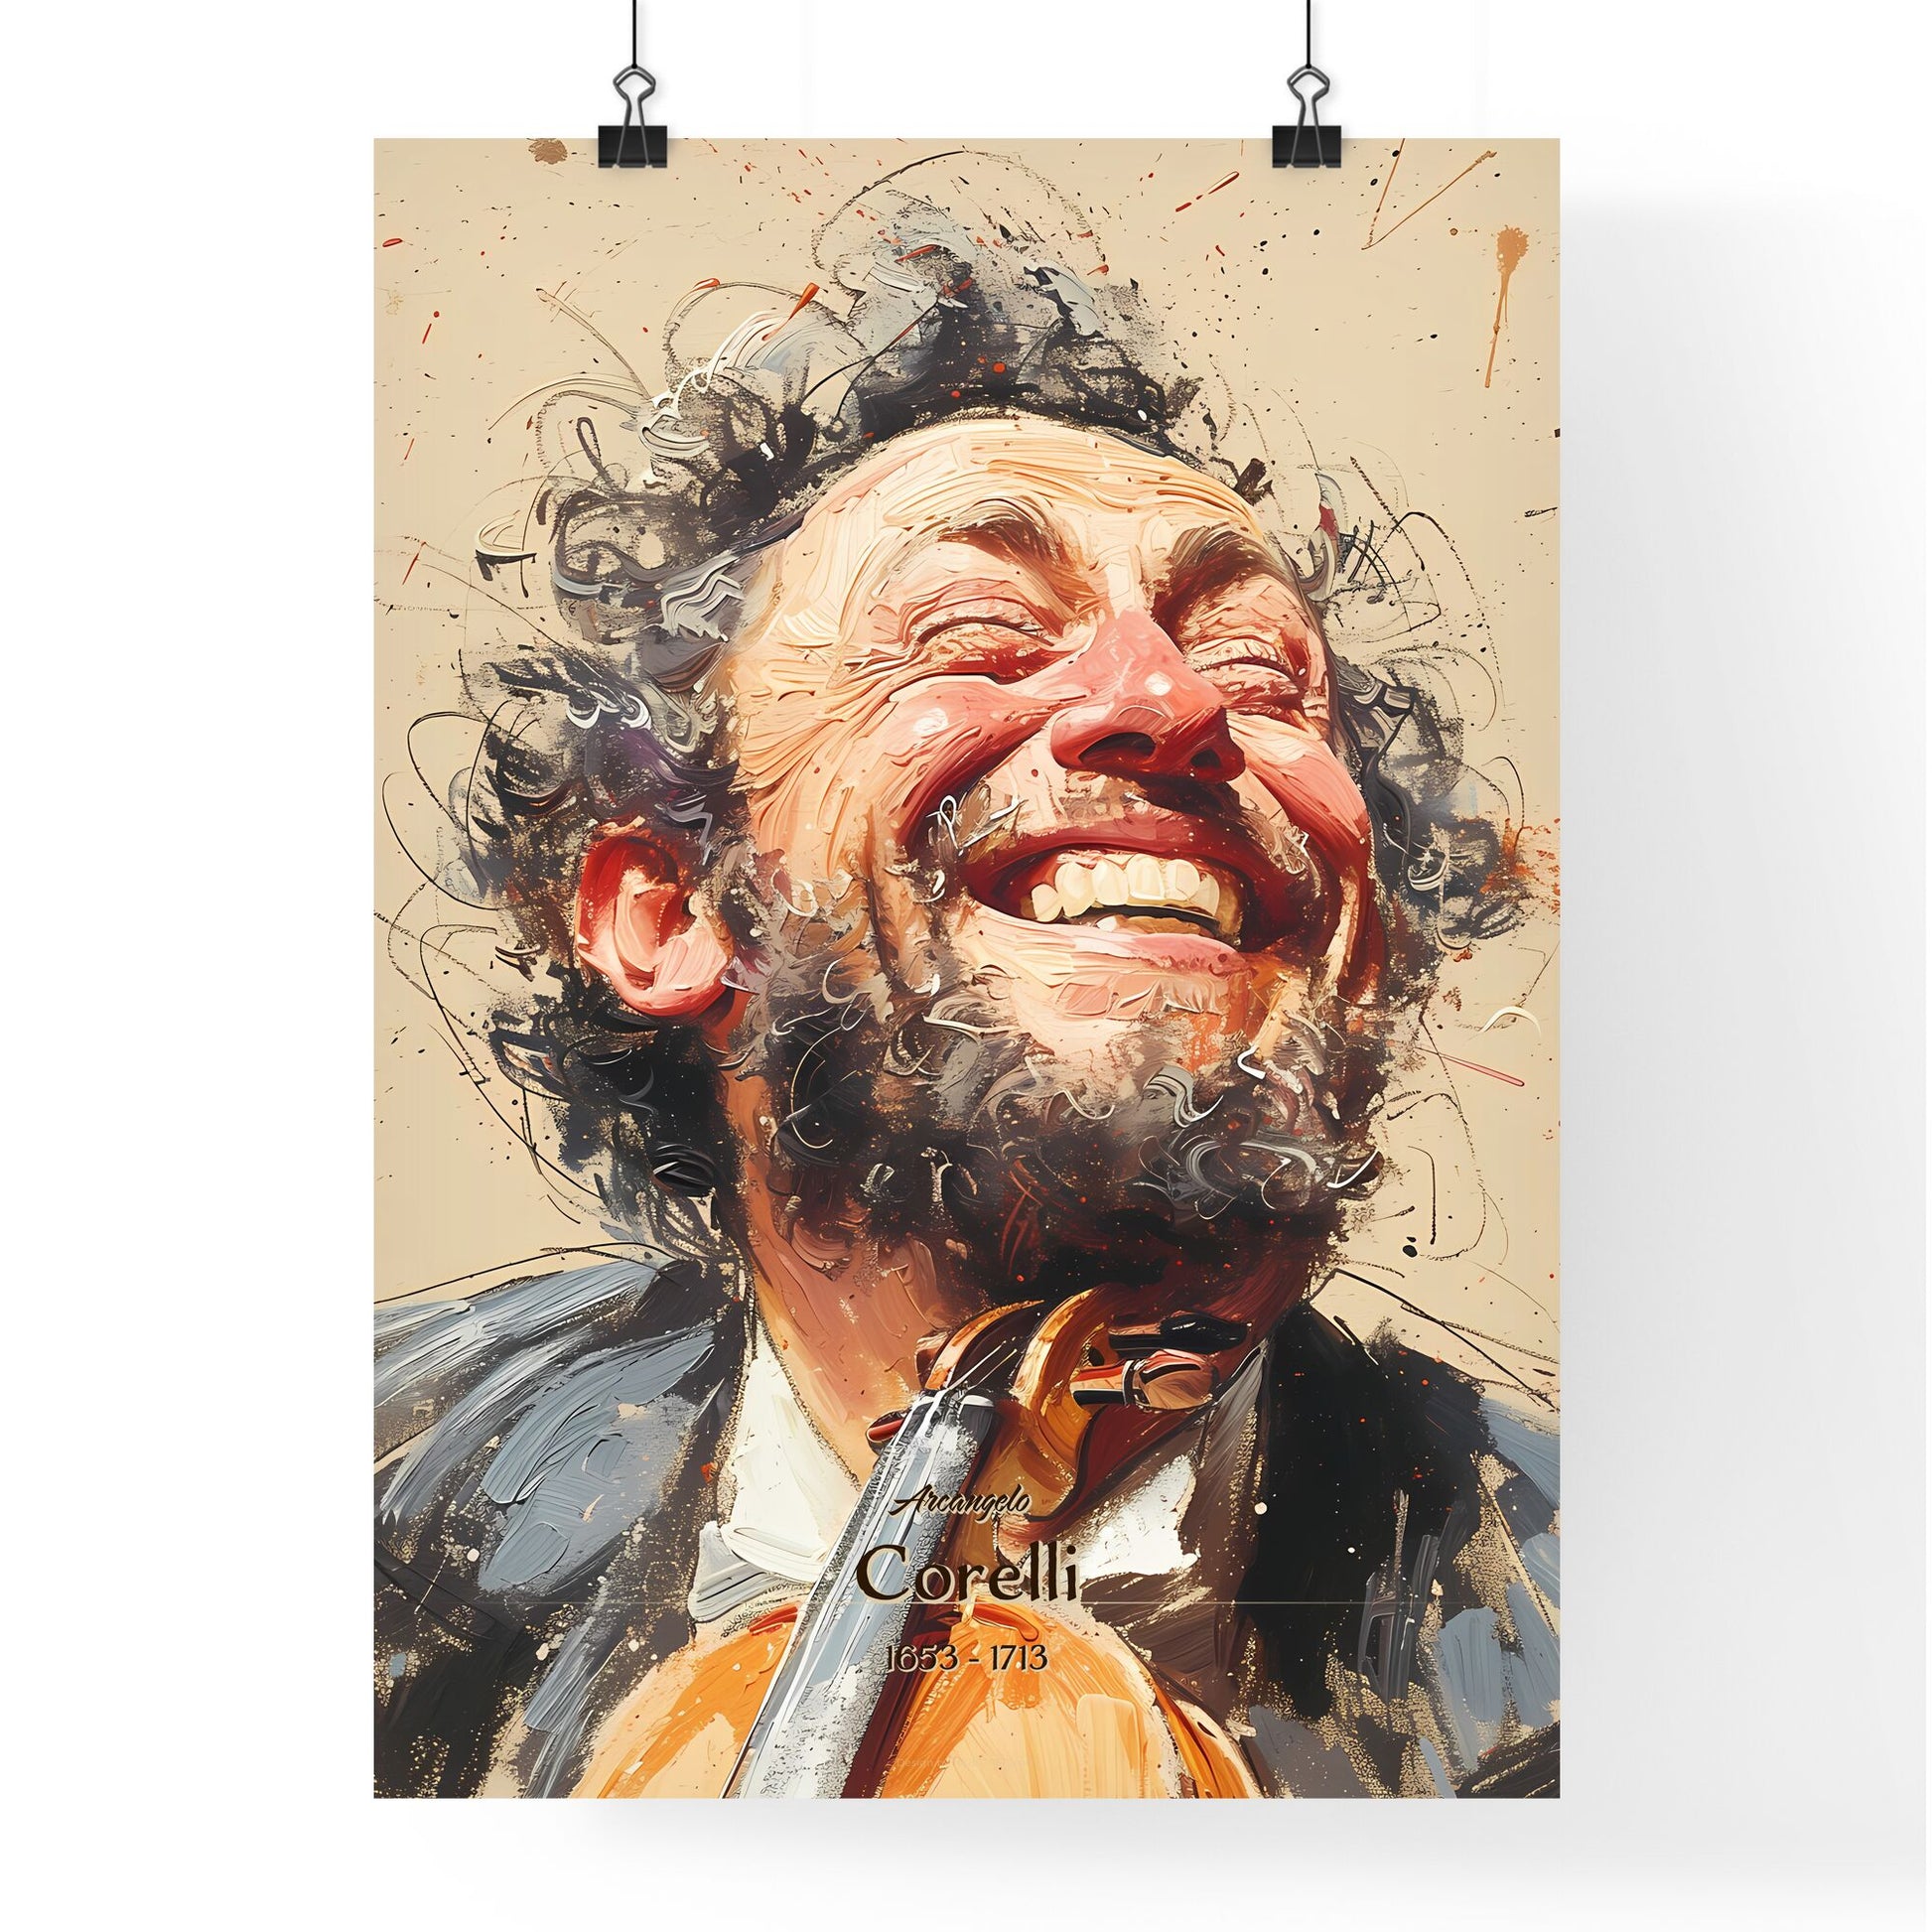 Arcangelo, Corelli, 1653 - 1713, A Poster of a man with a beard and mustache laughing Default Title